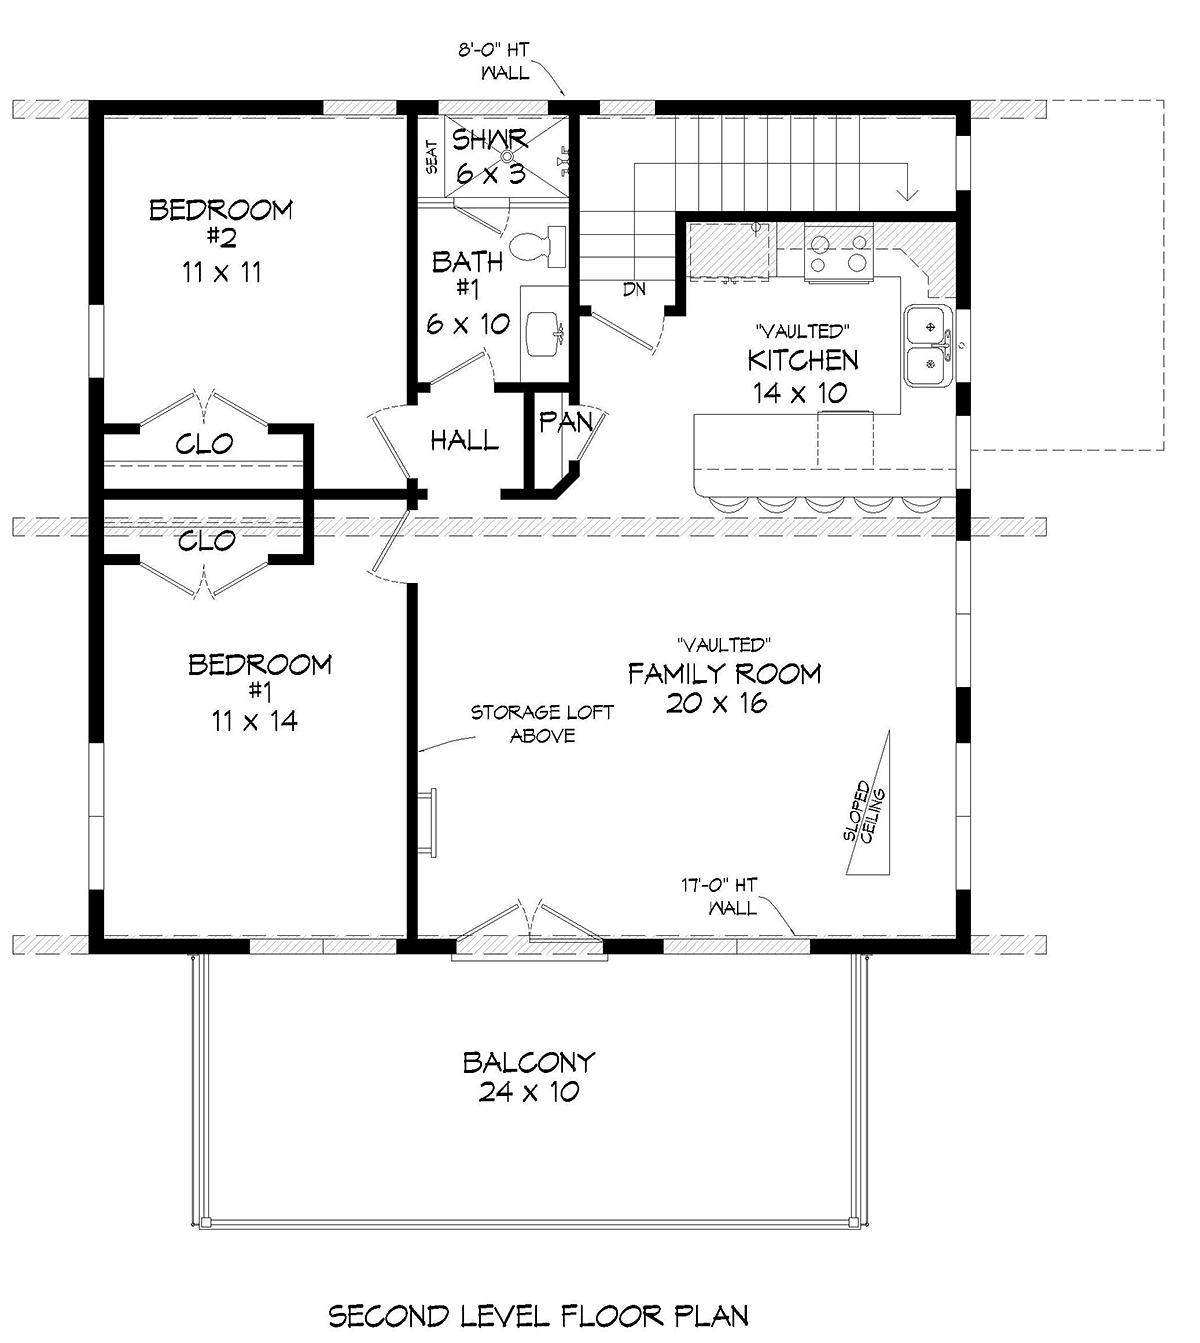 House Plan 80985 - Modern Style with 1559 Sq Ft, 2 Bed, 2 Bath